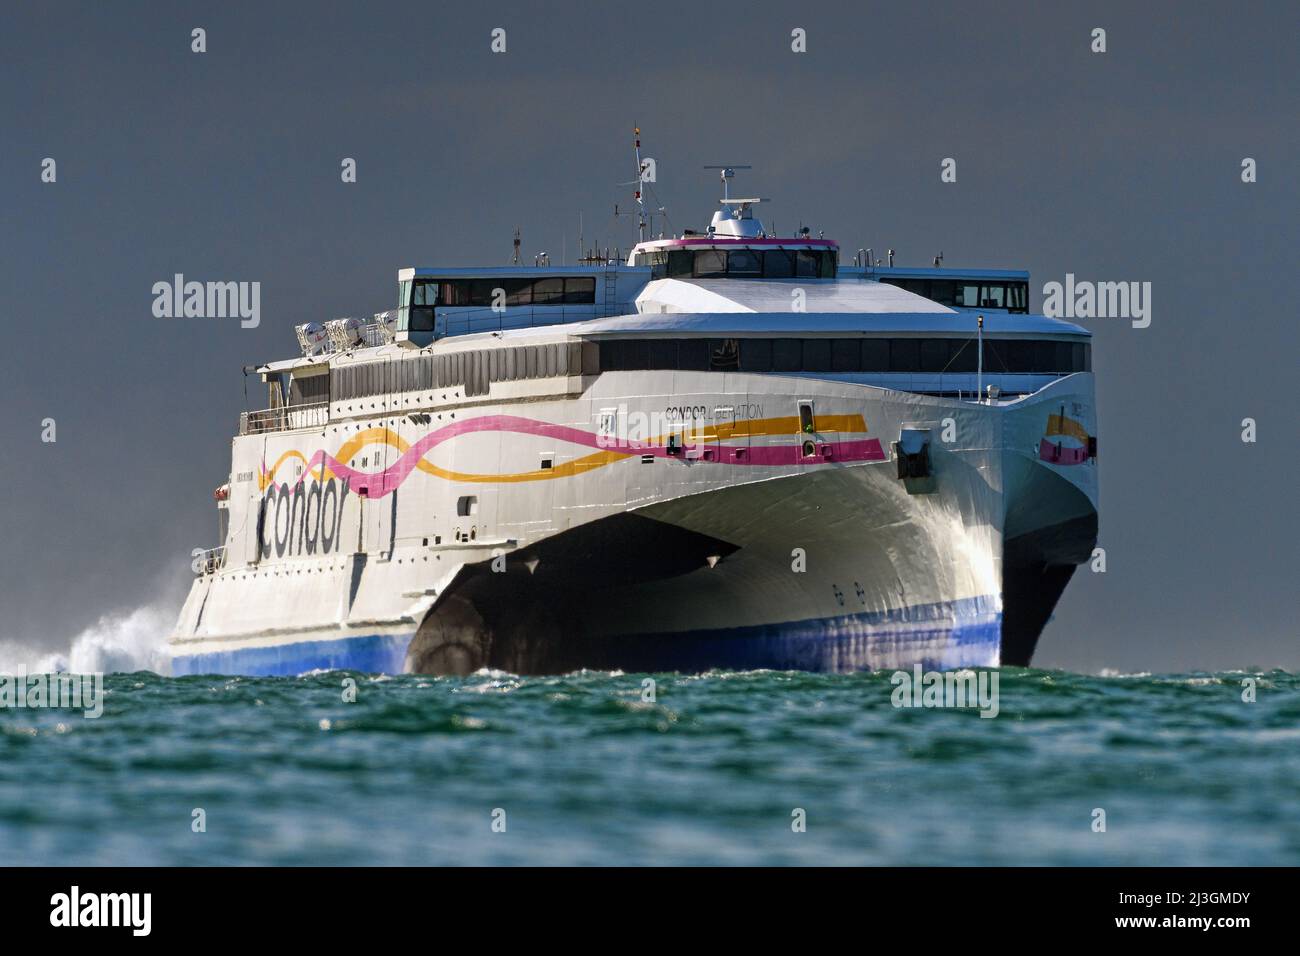 The trimaran Condor Liberation operates a high-speed ferry link between the UK mainland and the Channel Islands, Jersey and Guernsey - September 2020. Stock Photo